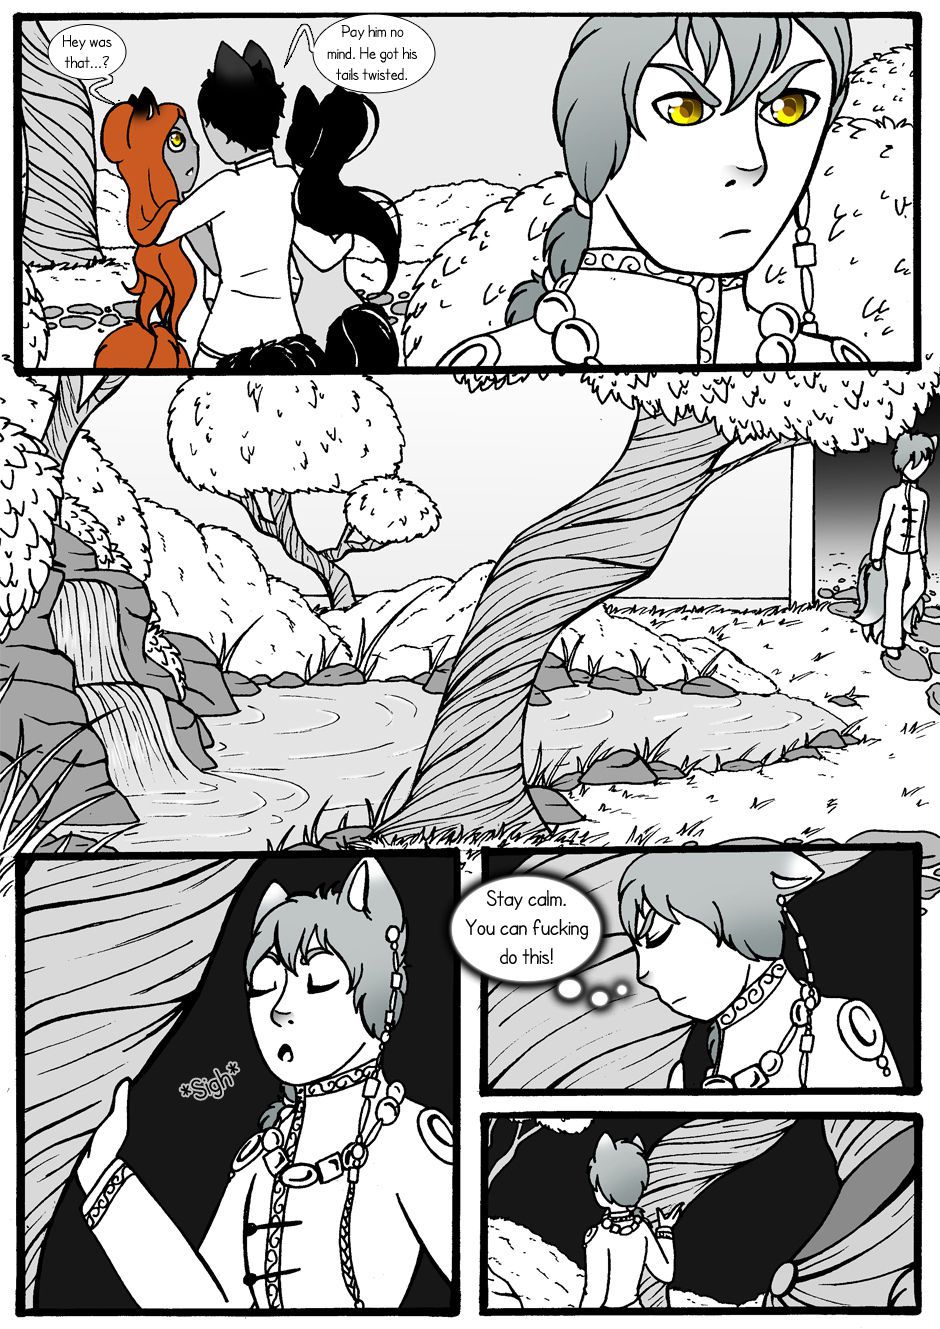 [Jeny-jen94] Between Kings and Queens [Ongoing] 30